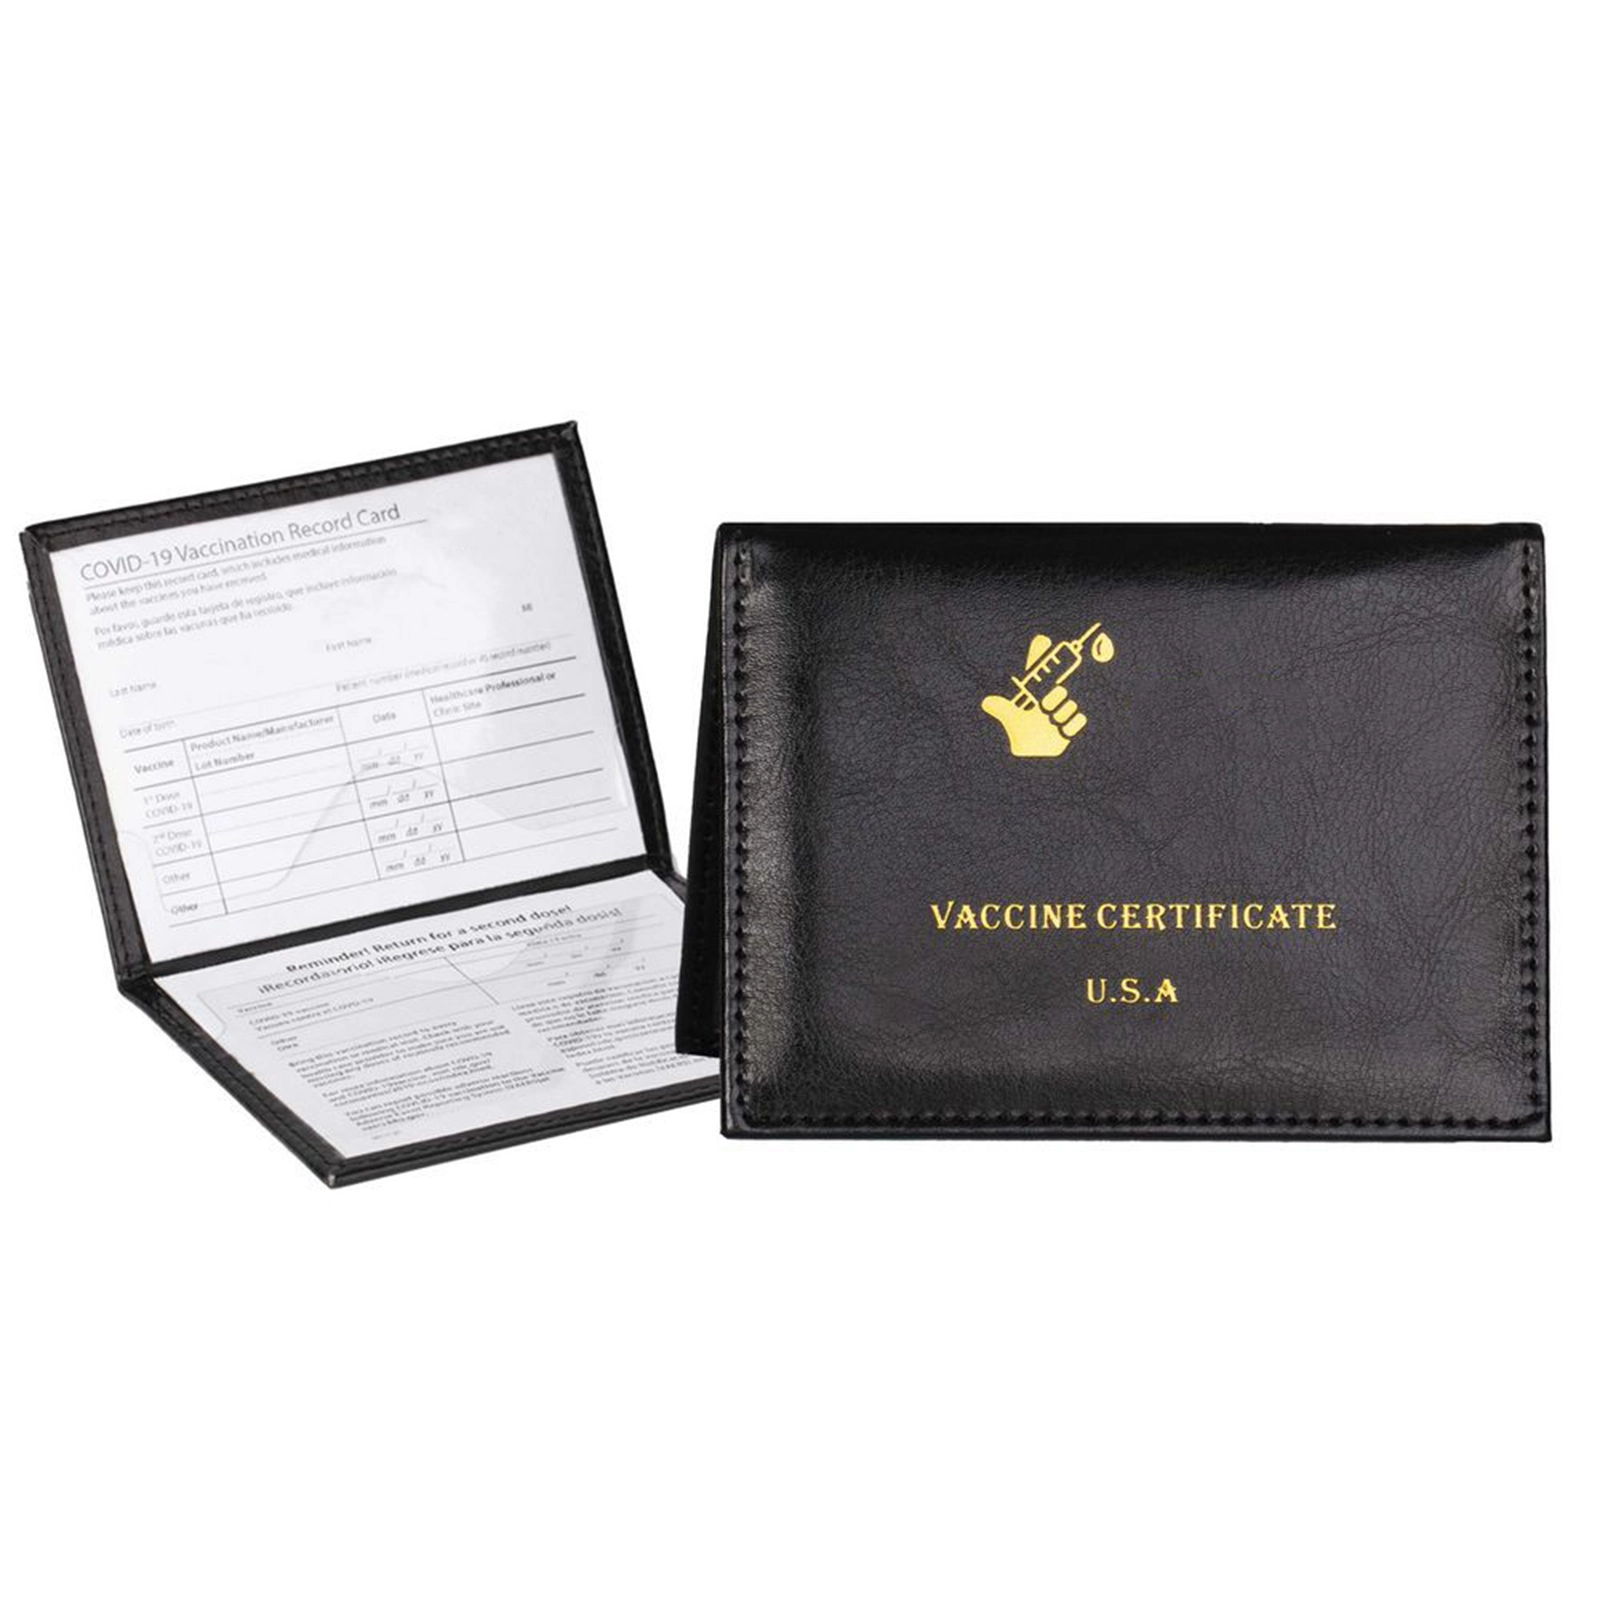 Multifunction Card Protector Registration Insurance Driving Documents Credit Cards PU Leather Holder Cover 10